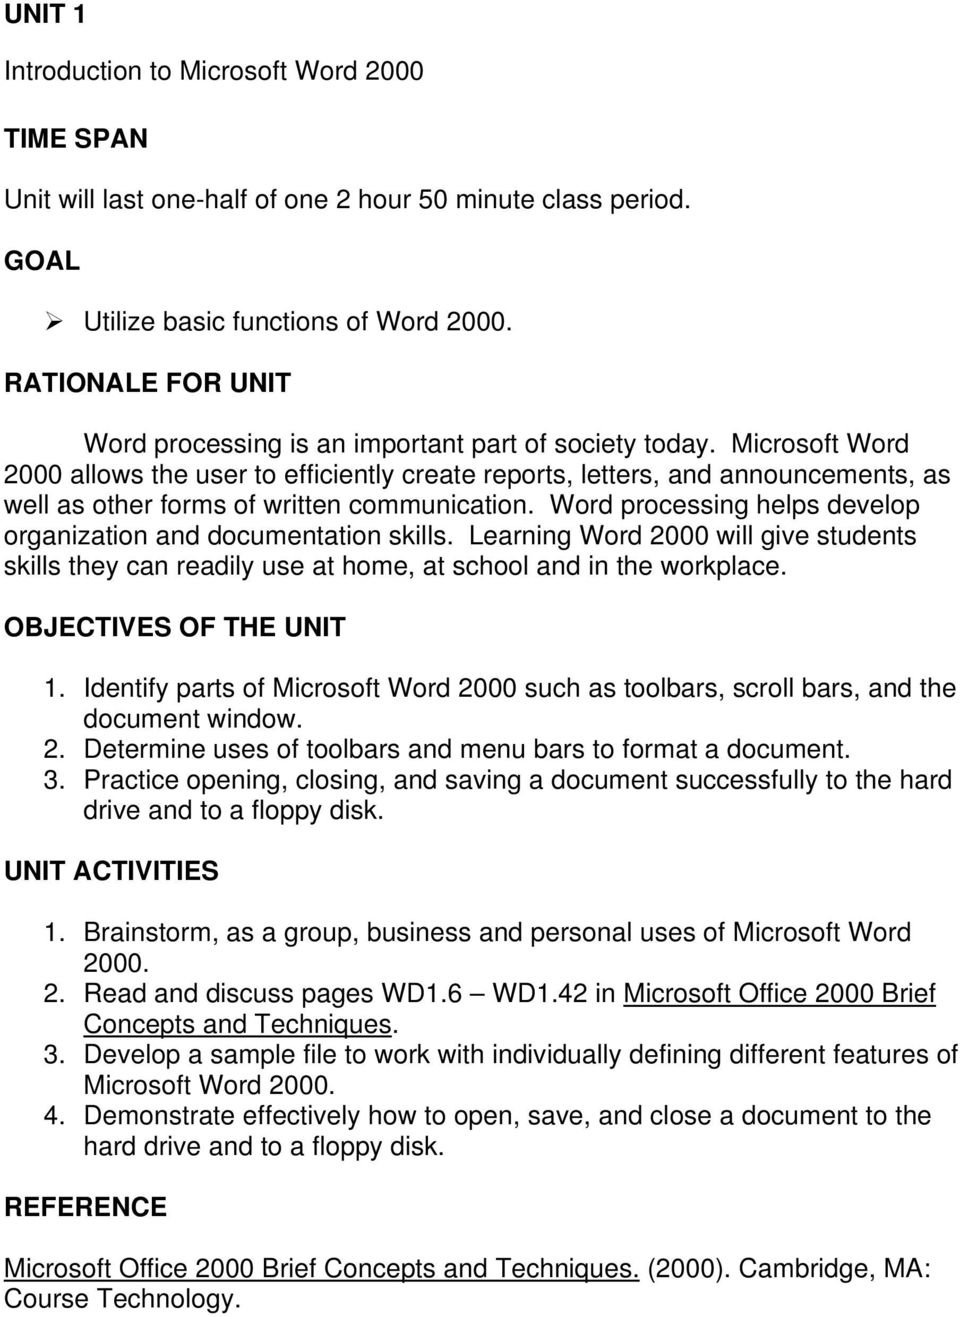 Microsoft Word 2000 allows the user to efficiently create reports, letters, and announcements, as well as other forms of written communication.